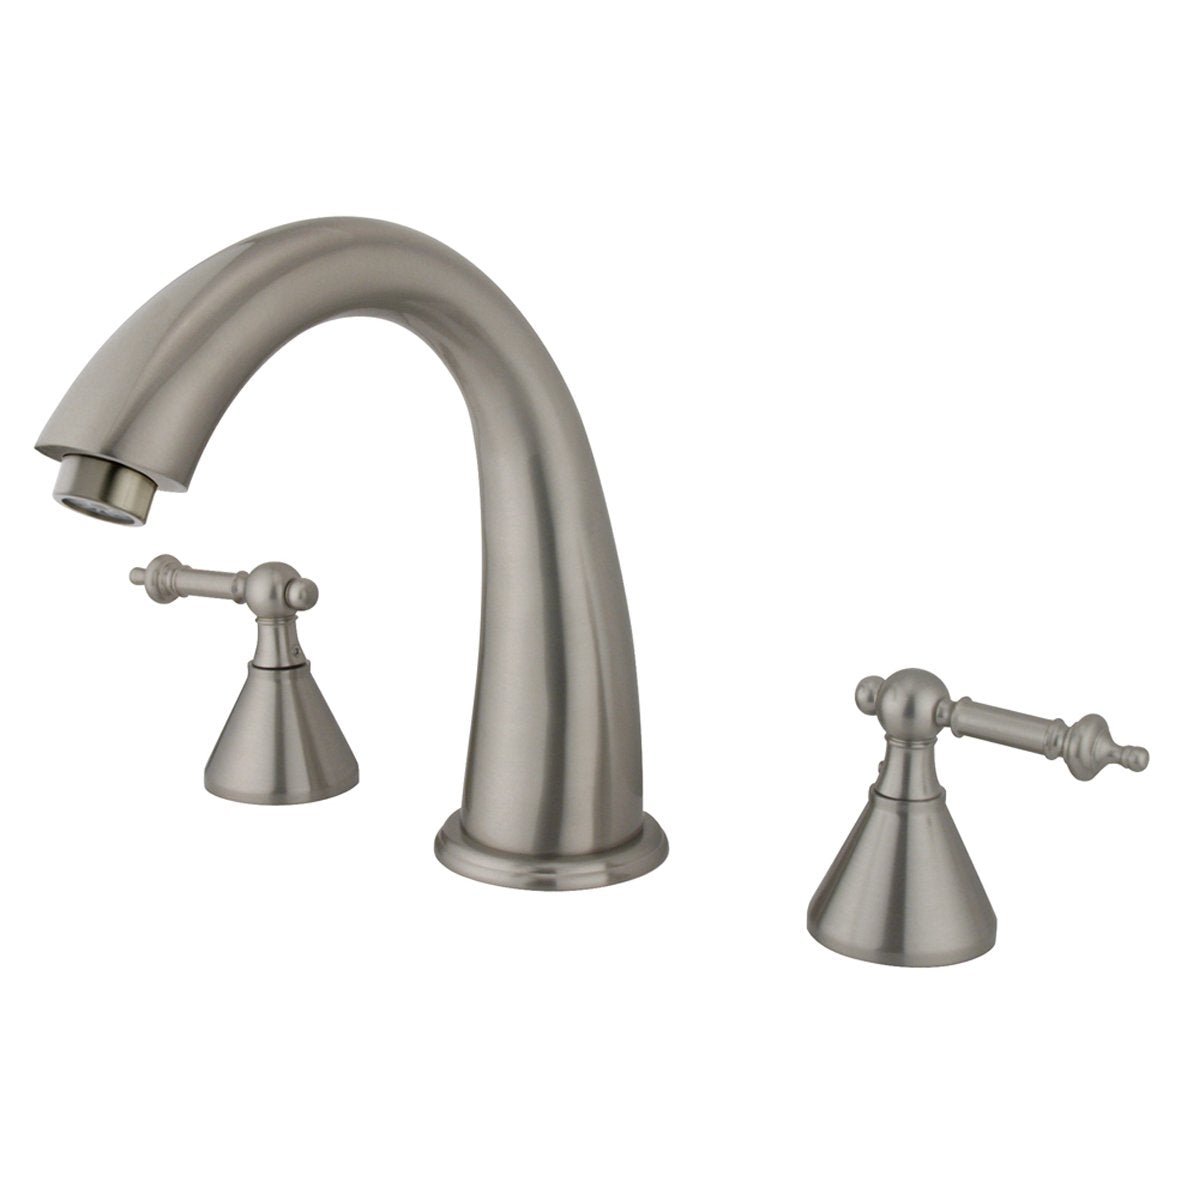 Kingston Brass Royale Contemporary Two Handle Roman Tub Filler-Tub Faucets-Free Shipping-Directsinks.